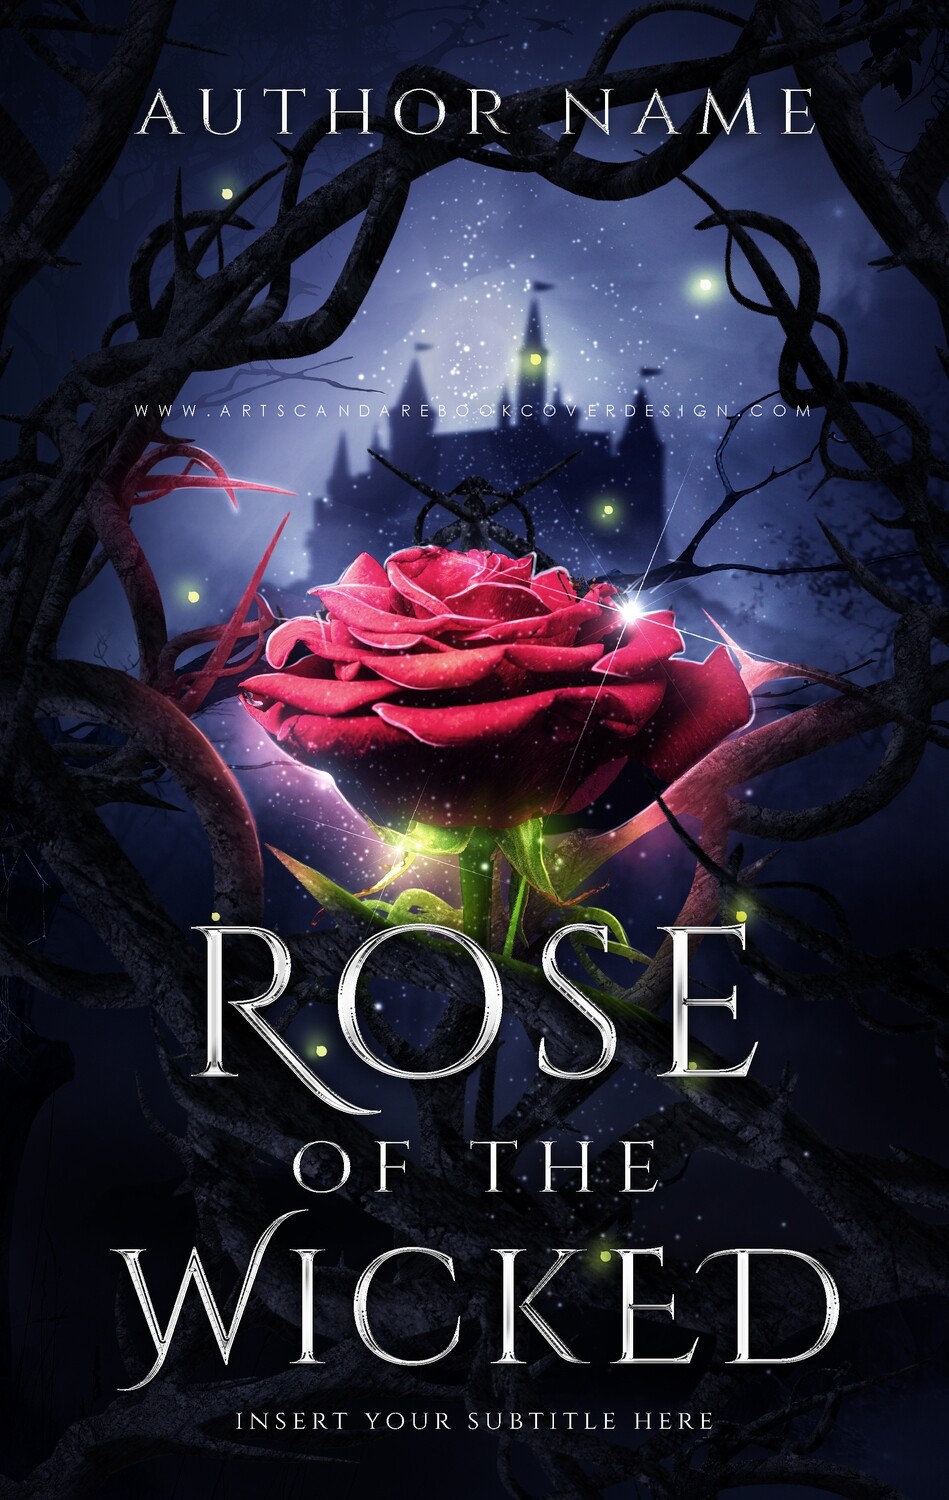 Ebook: Rose of the Wicked